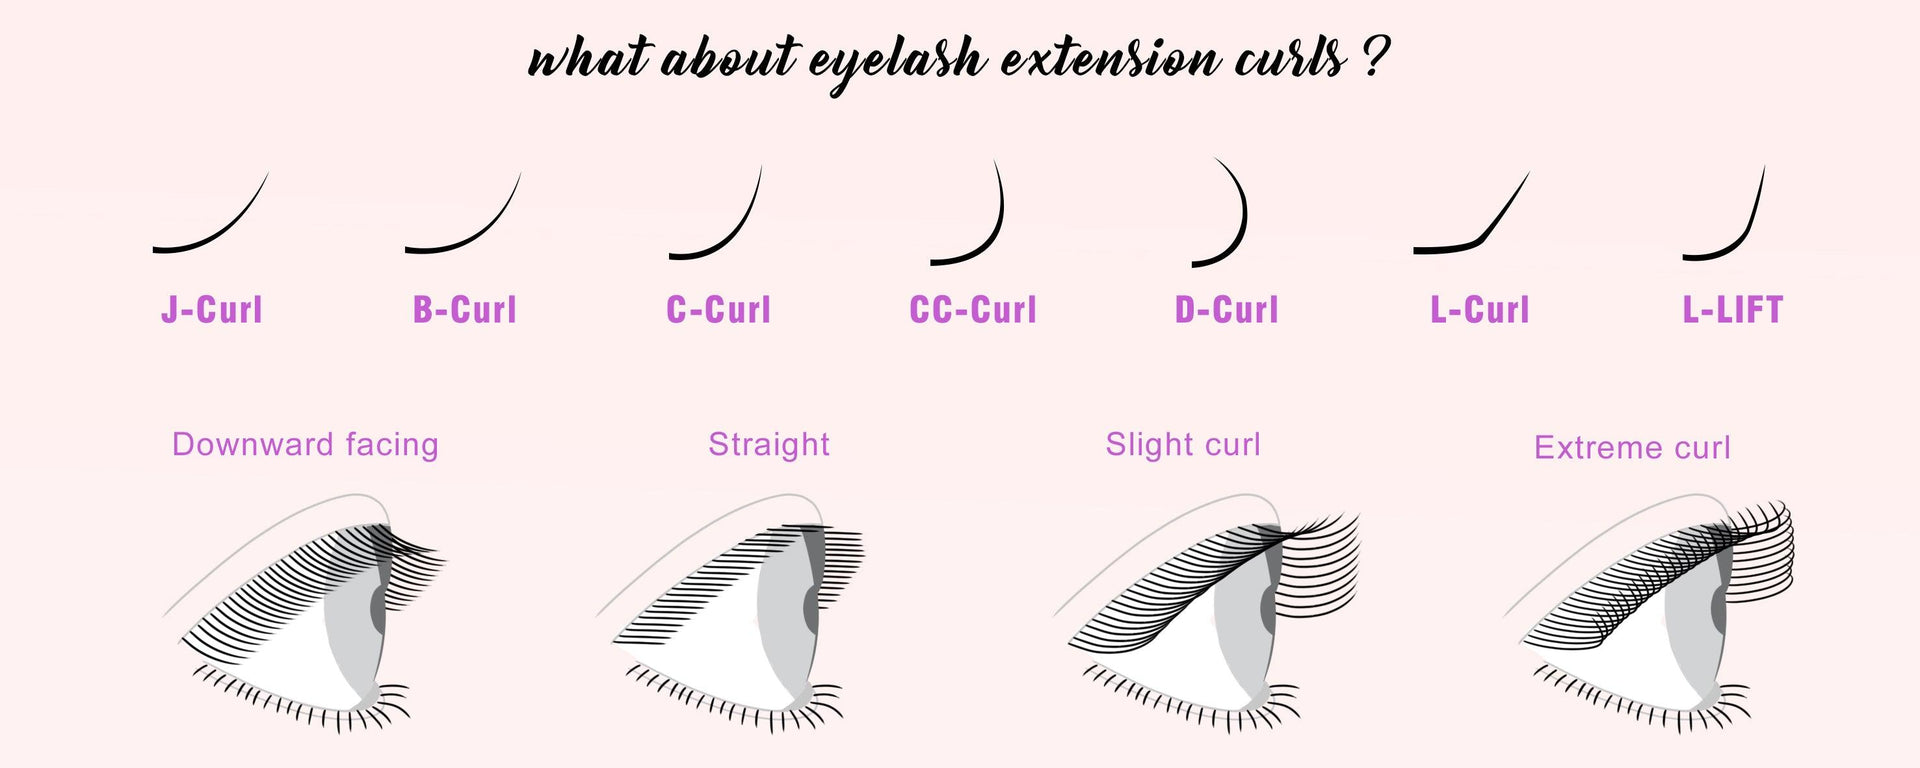 What about Eyelash Extension Curls？